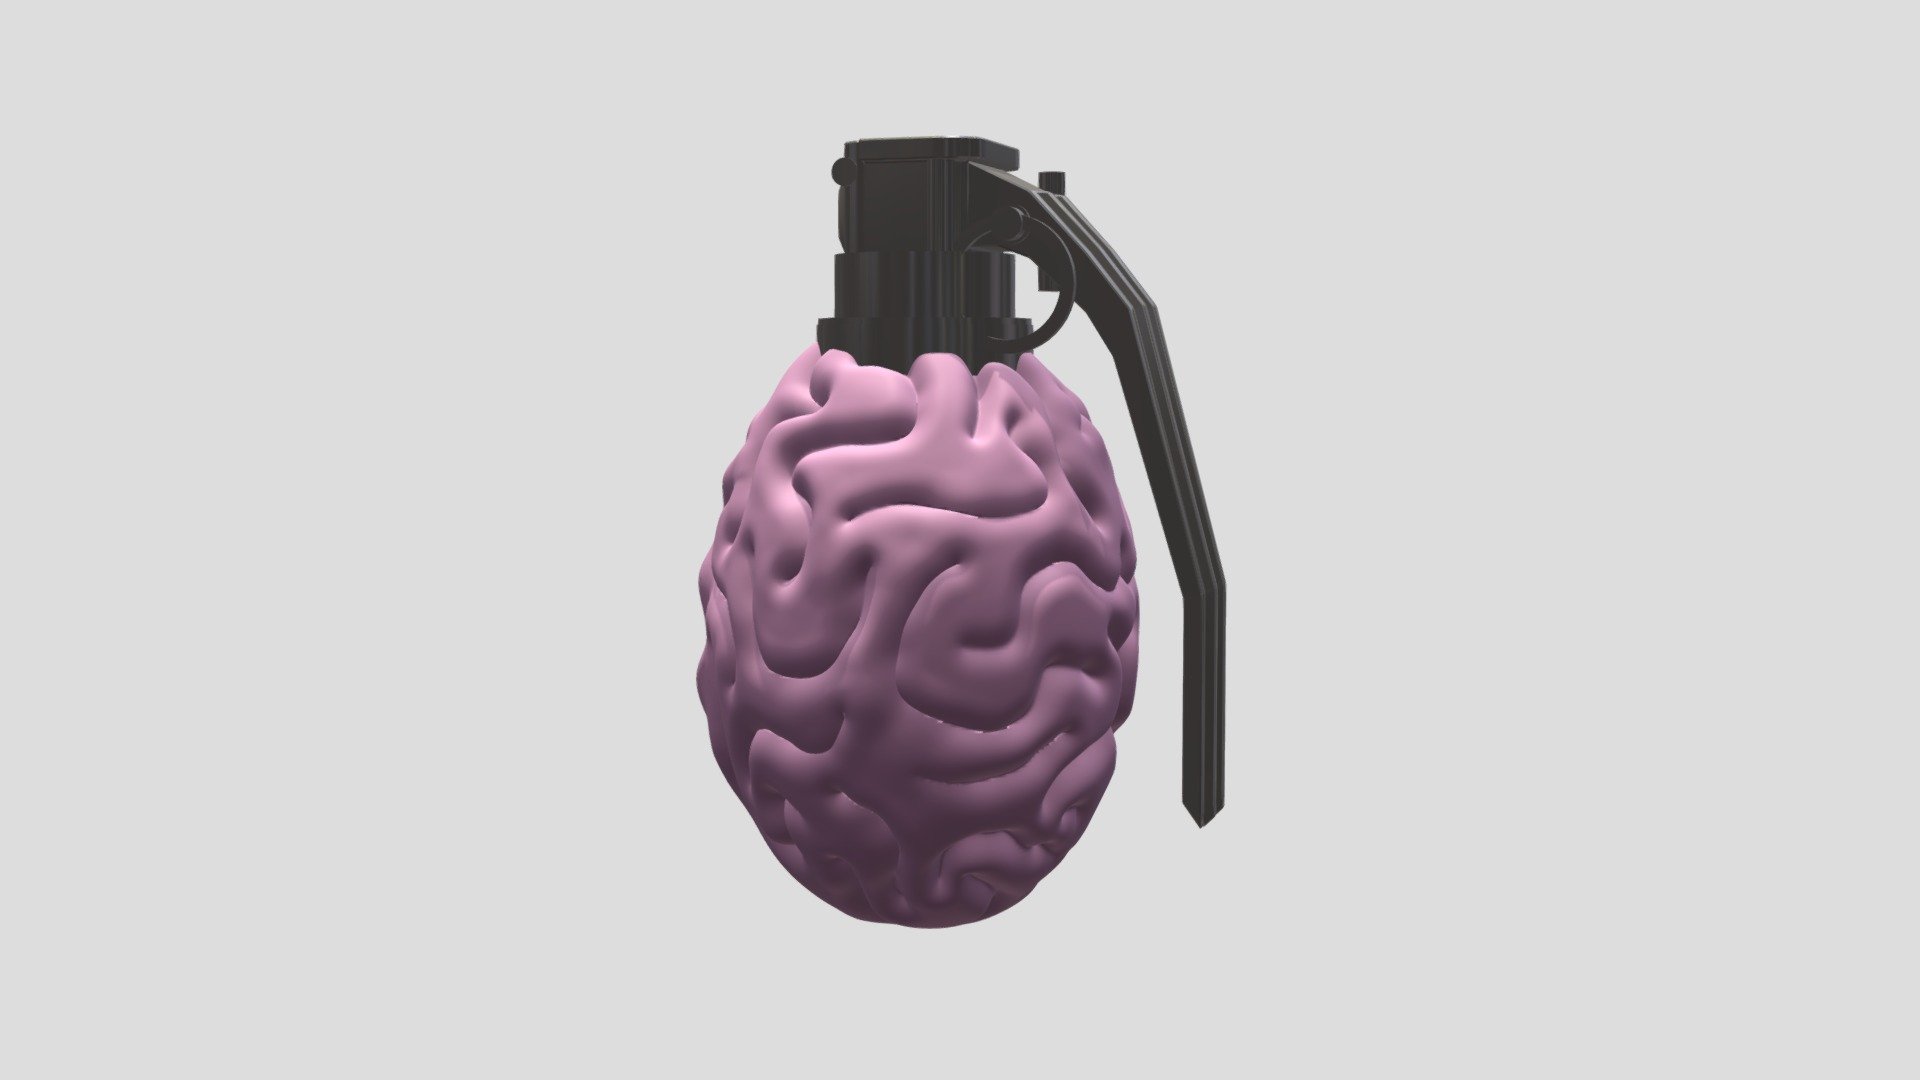 Link to download:
https://cults3d.com/en/3d-model/art/brain-granade

Our most powerful weapon: Our intelligence and reasoning power.
This work is a symbol that our rational and conductive capacities have the quality for an unparalleled explosion 3d model